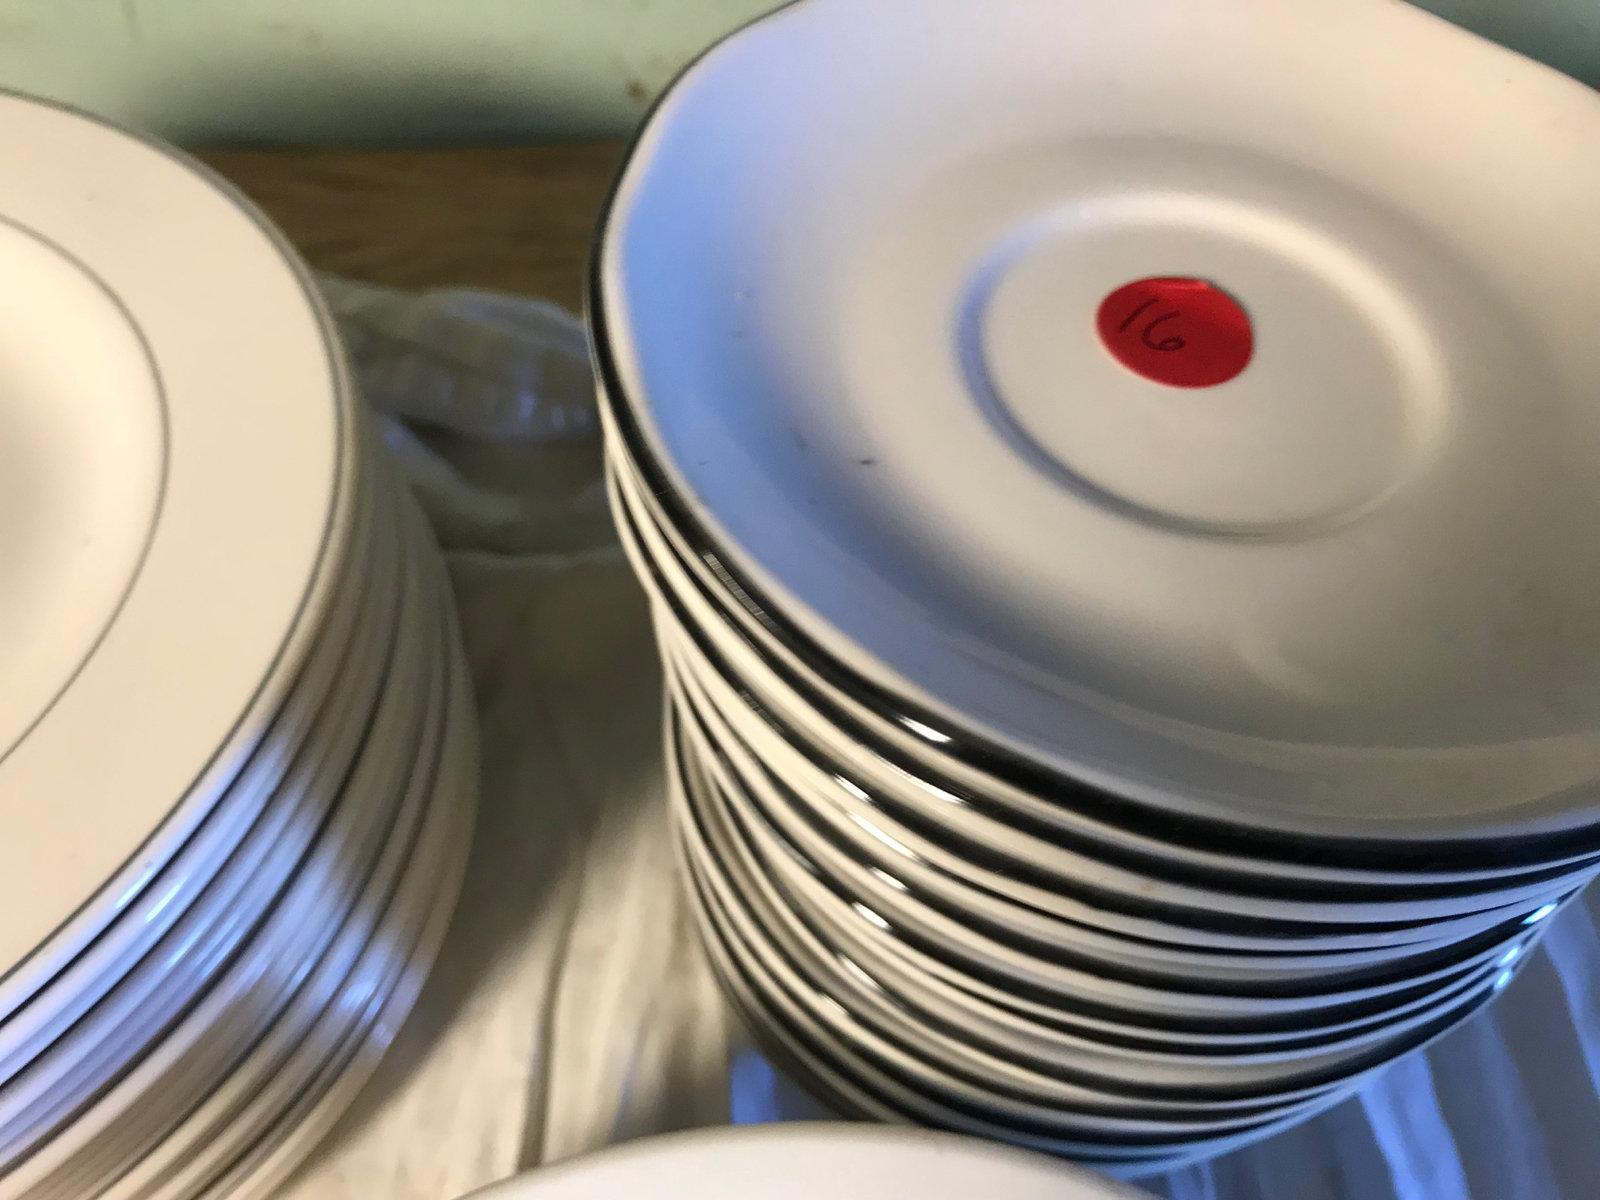 Plates and saucers with busboy tub, 16 saucers and 25 plates total